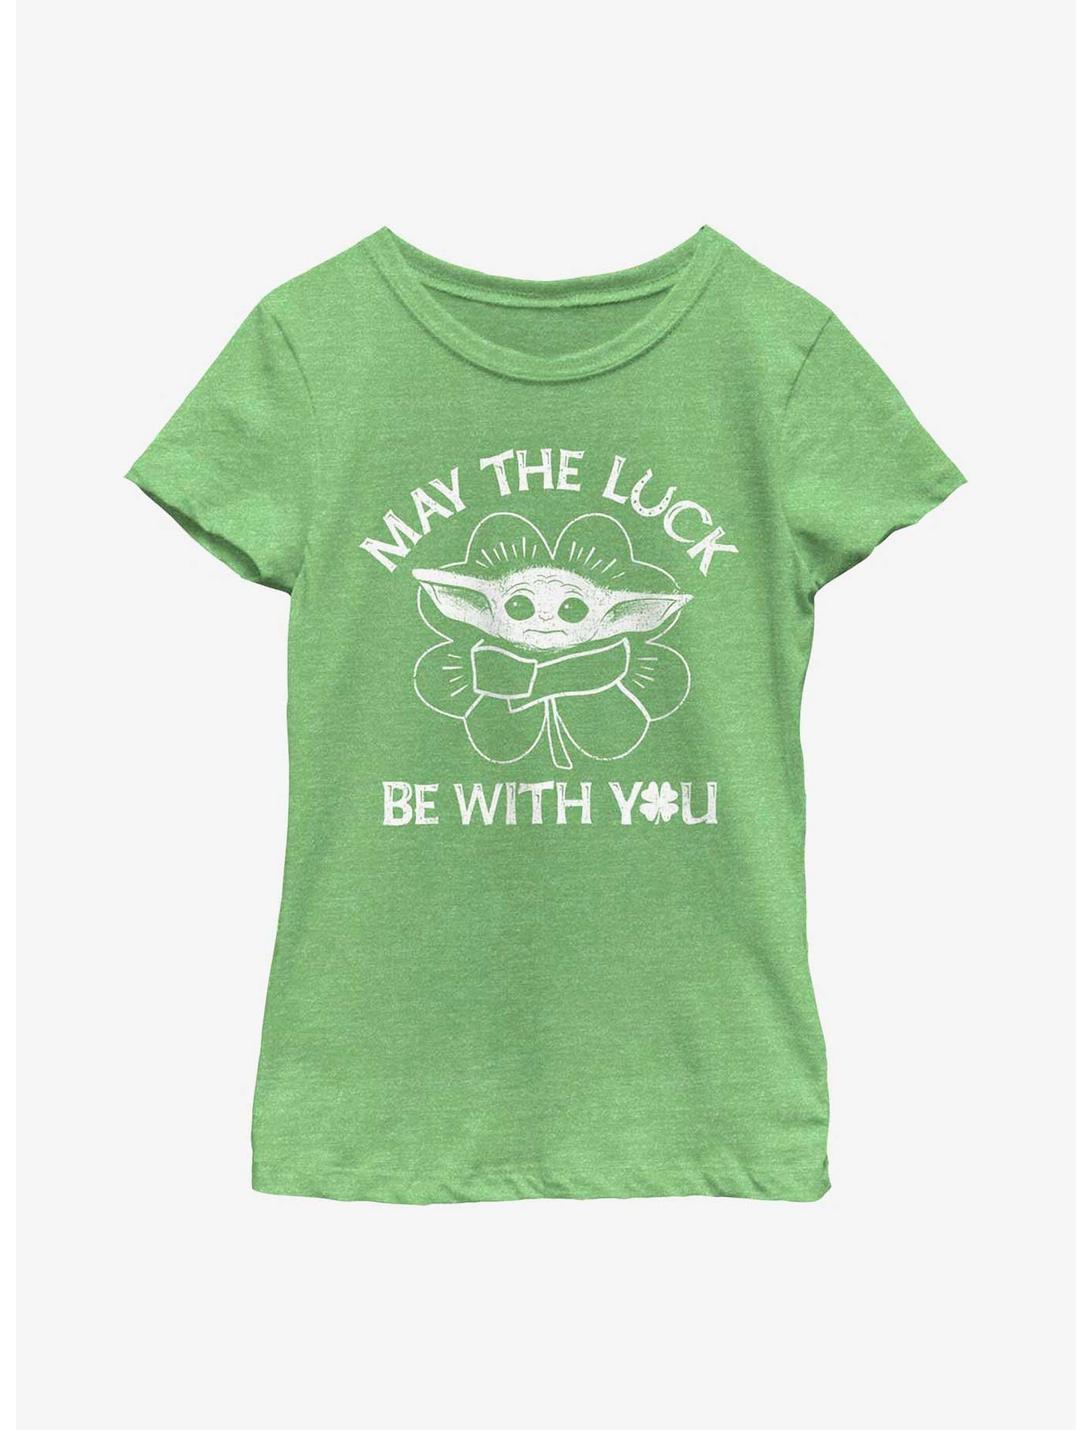 Star Wars The Mandalorian Strong Luck Youth Girls T-Shirt, GRN APPLE, hi-res